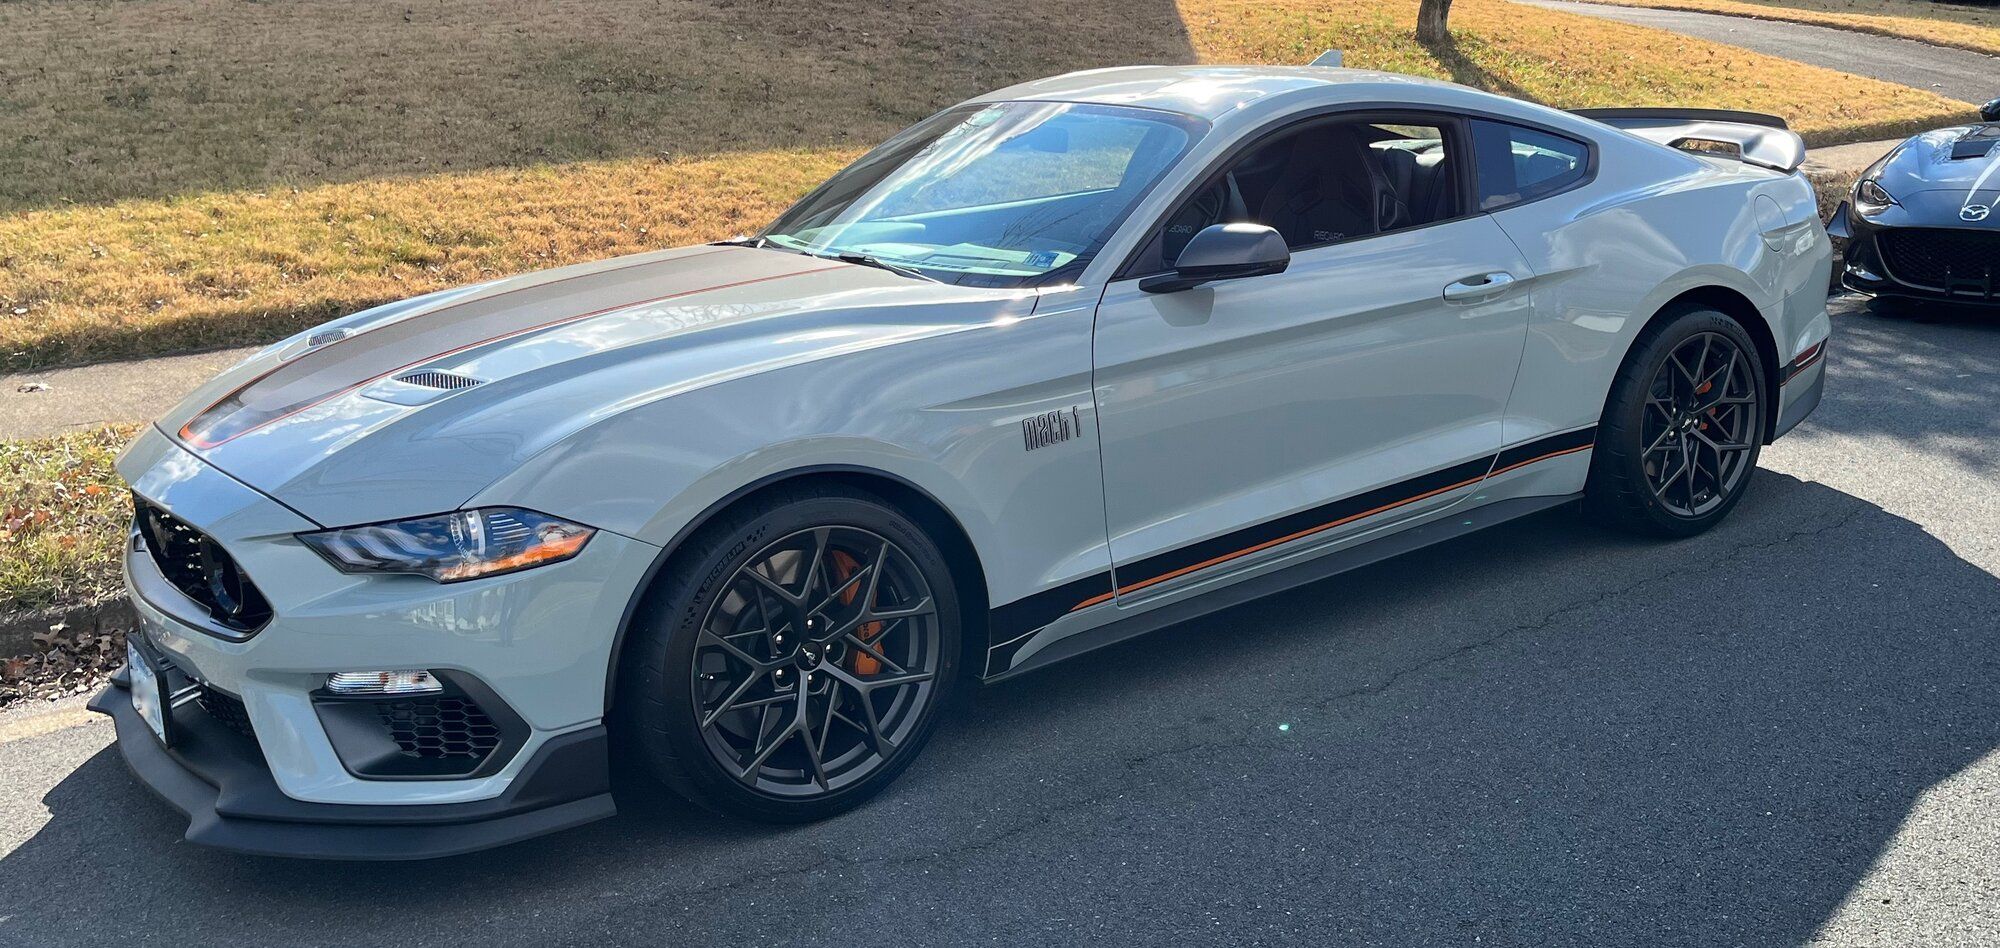 2022 Mustang
Mach1  (Daniel's S550 Mach 1 - Next project track day car)